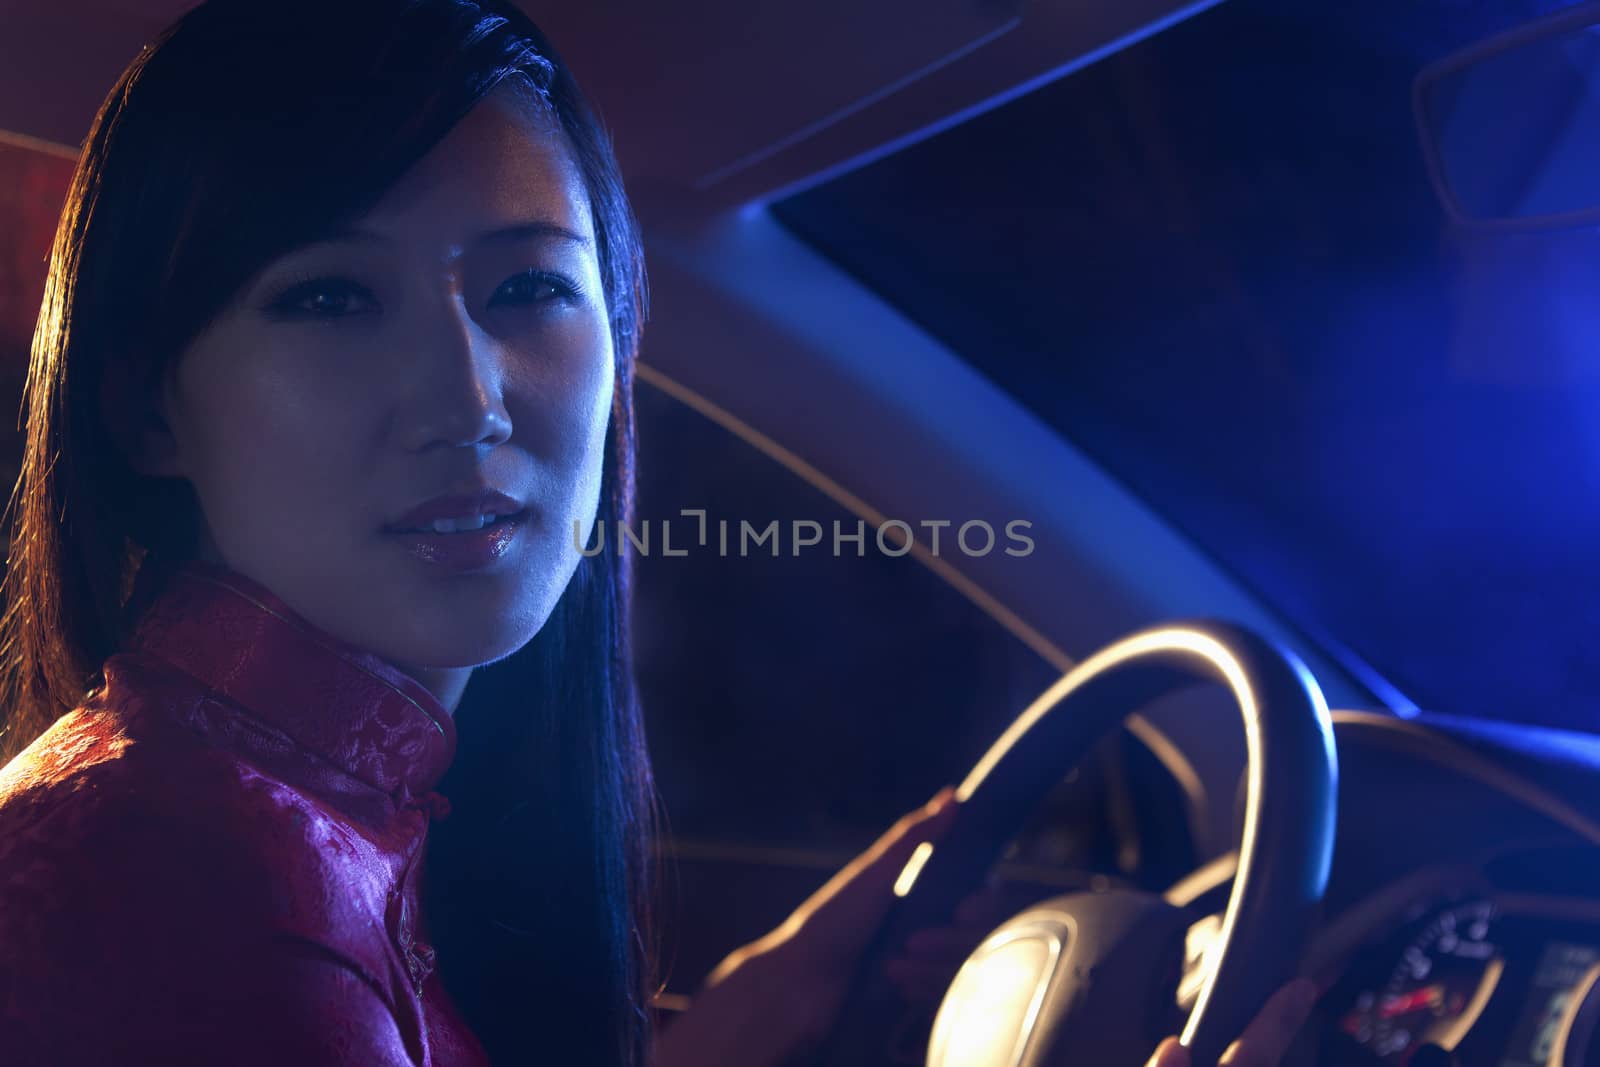 Portrait of young, beautiful woman in traditional clothing driving at night in Beijing by XiXinXing